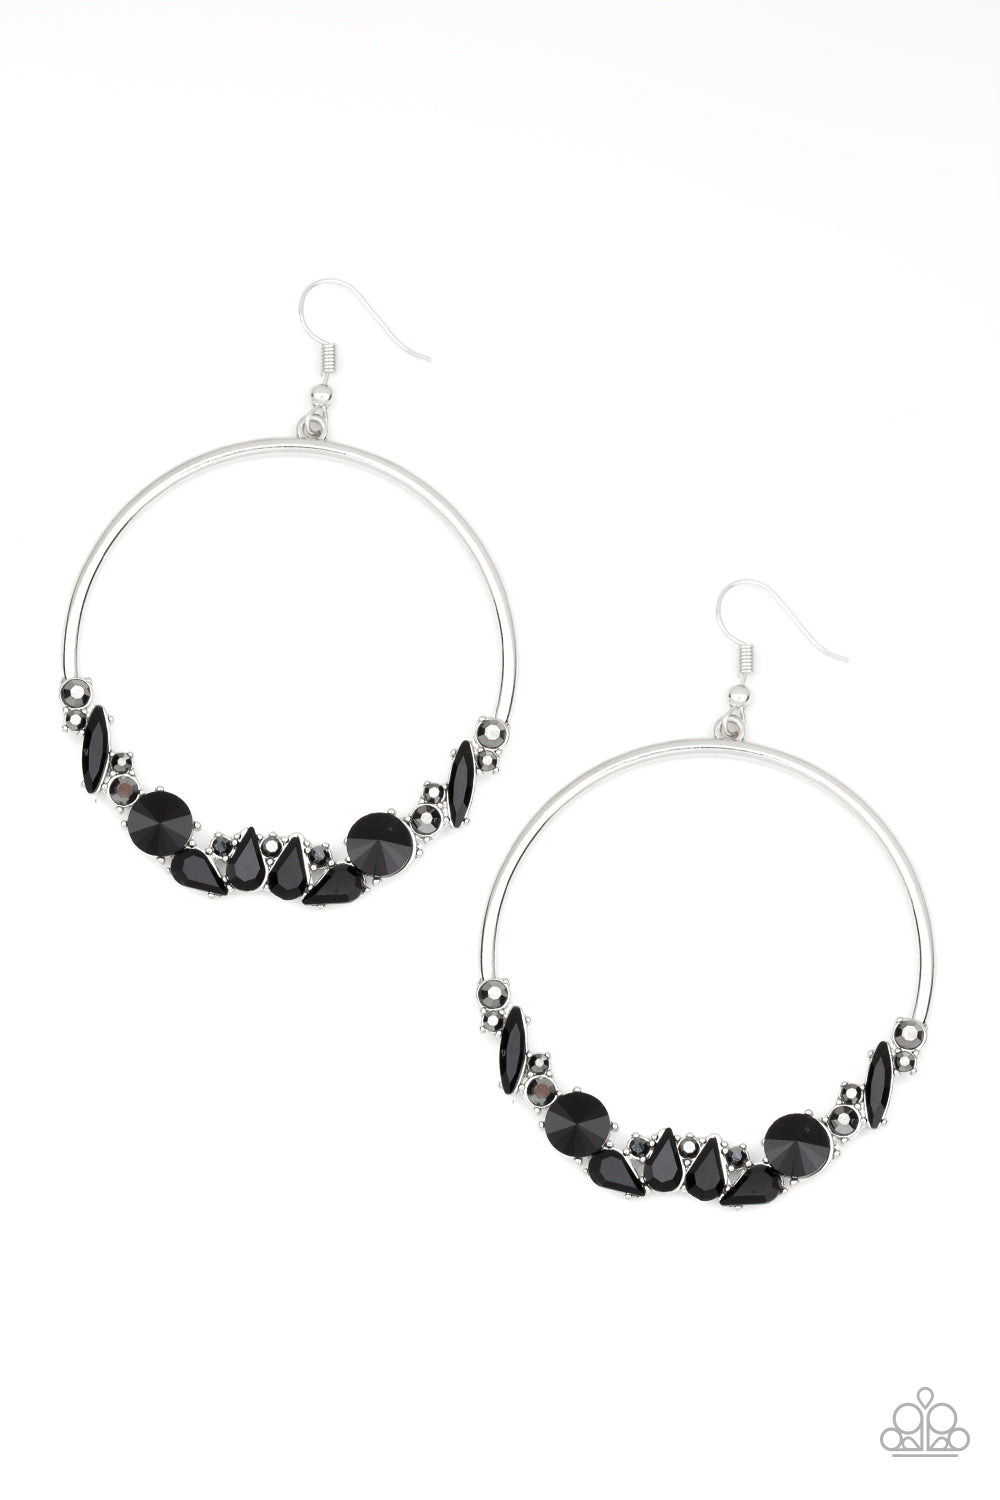 Vary in size and shape, an edgy collection of black and hematite rhinestones are encrusted along the bottom of a silver hoop for a glamorous look. Earring attaches to a standard fishhook fitting.